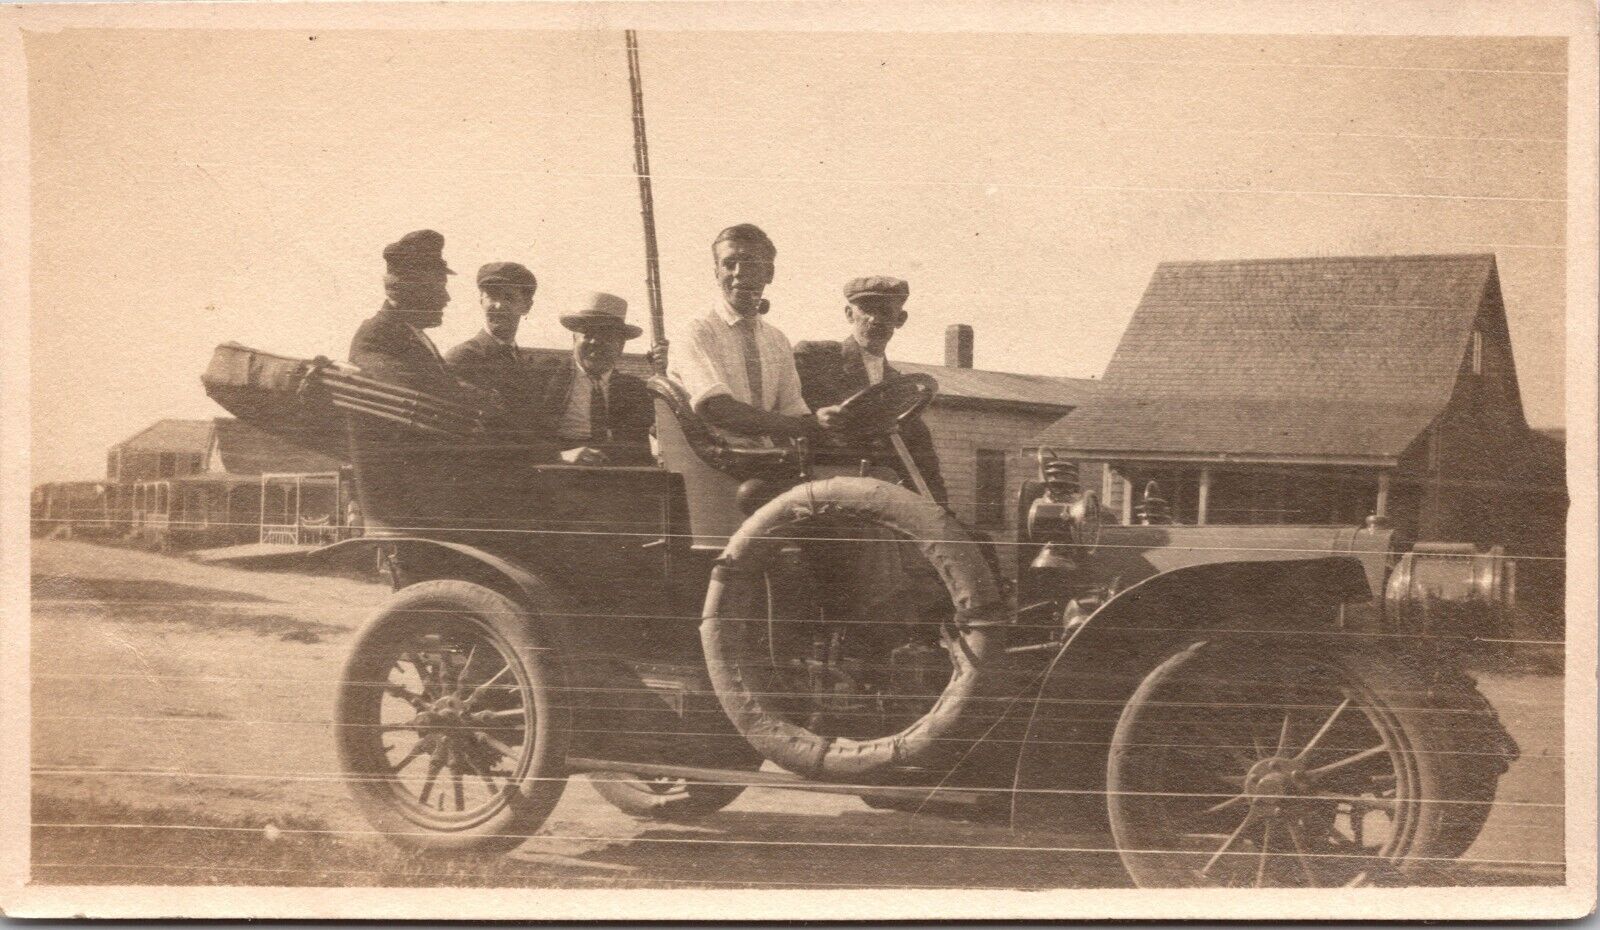 Antique Photo 1907 Locomobile Filled With Five Men Street Scene Early Automobile